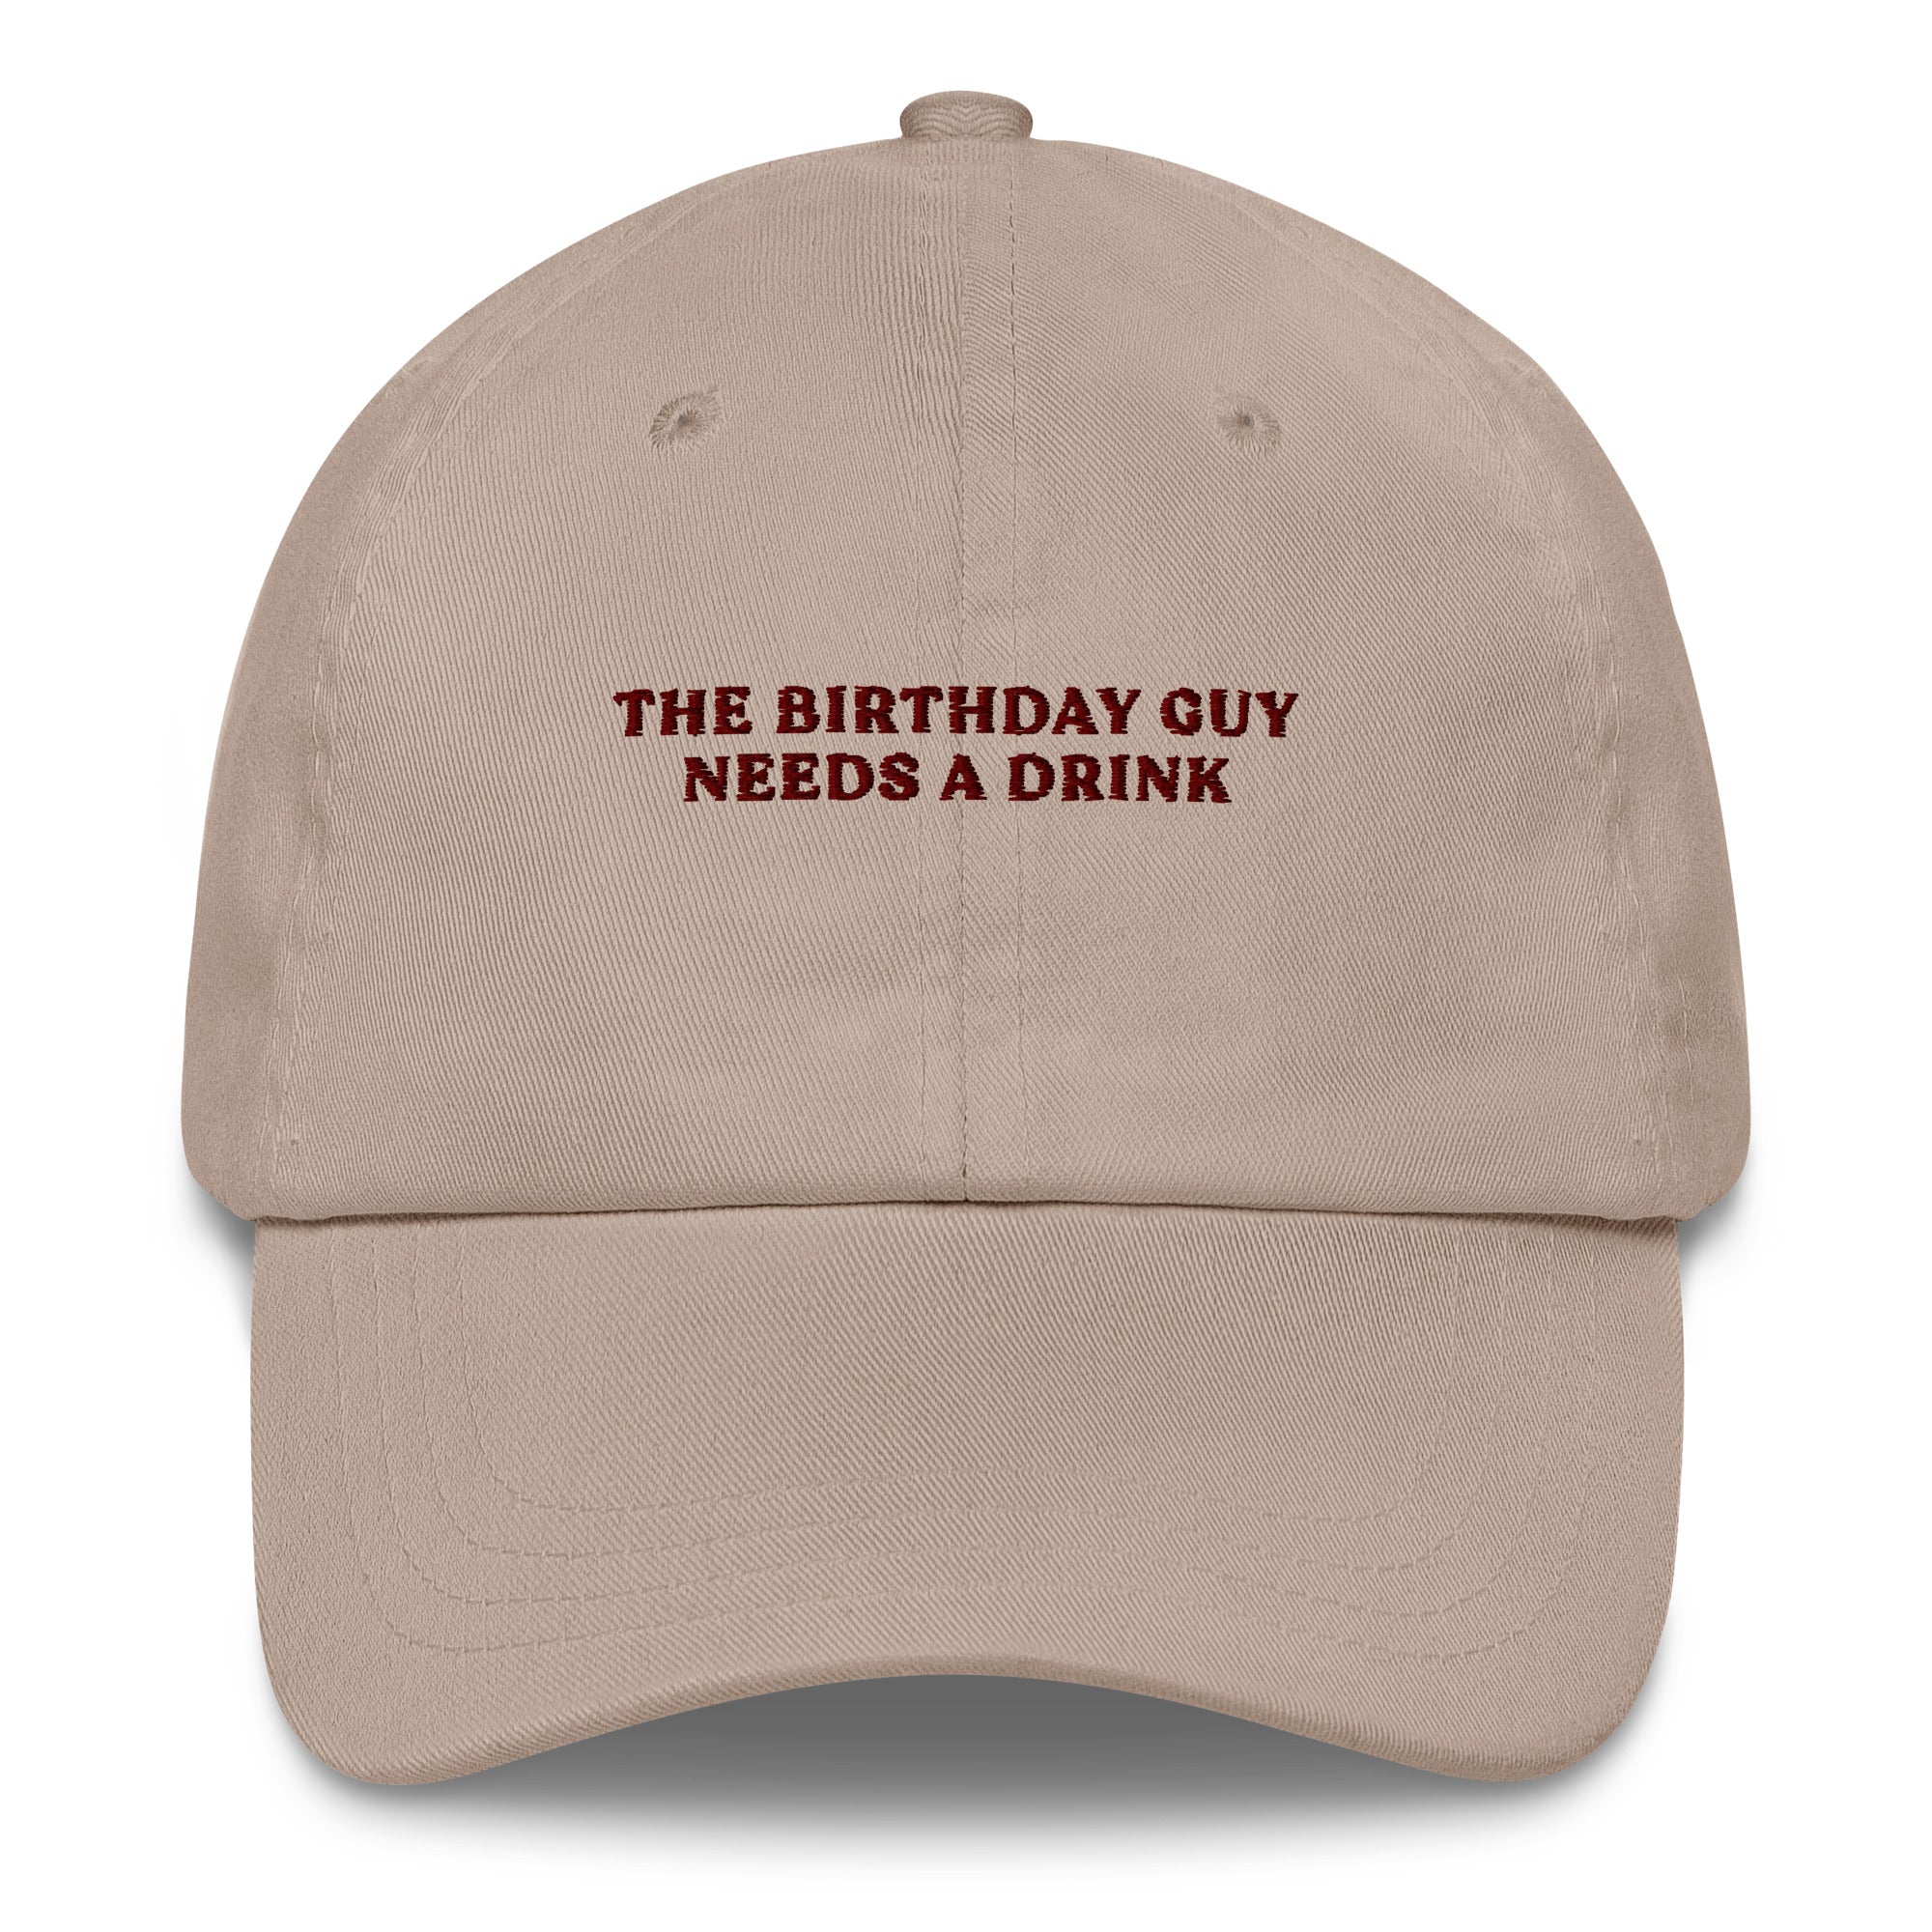 The Birthday Guy needs a Drink - Cap